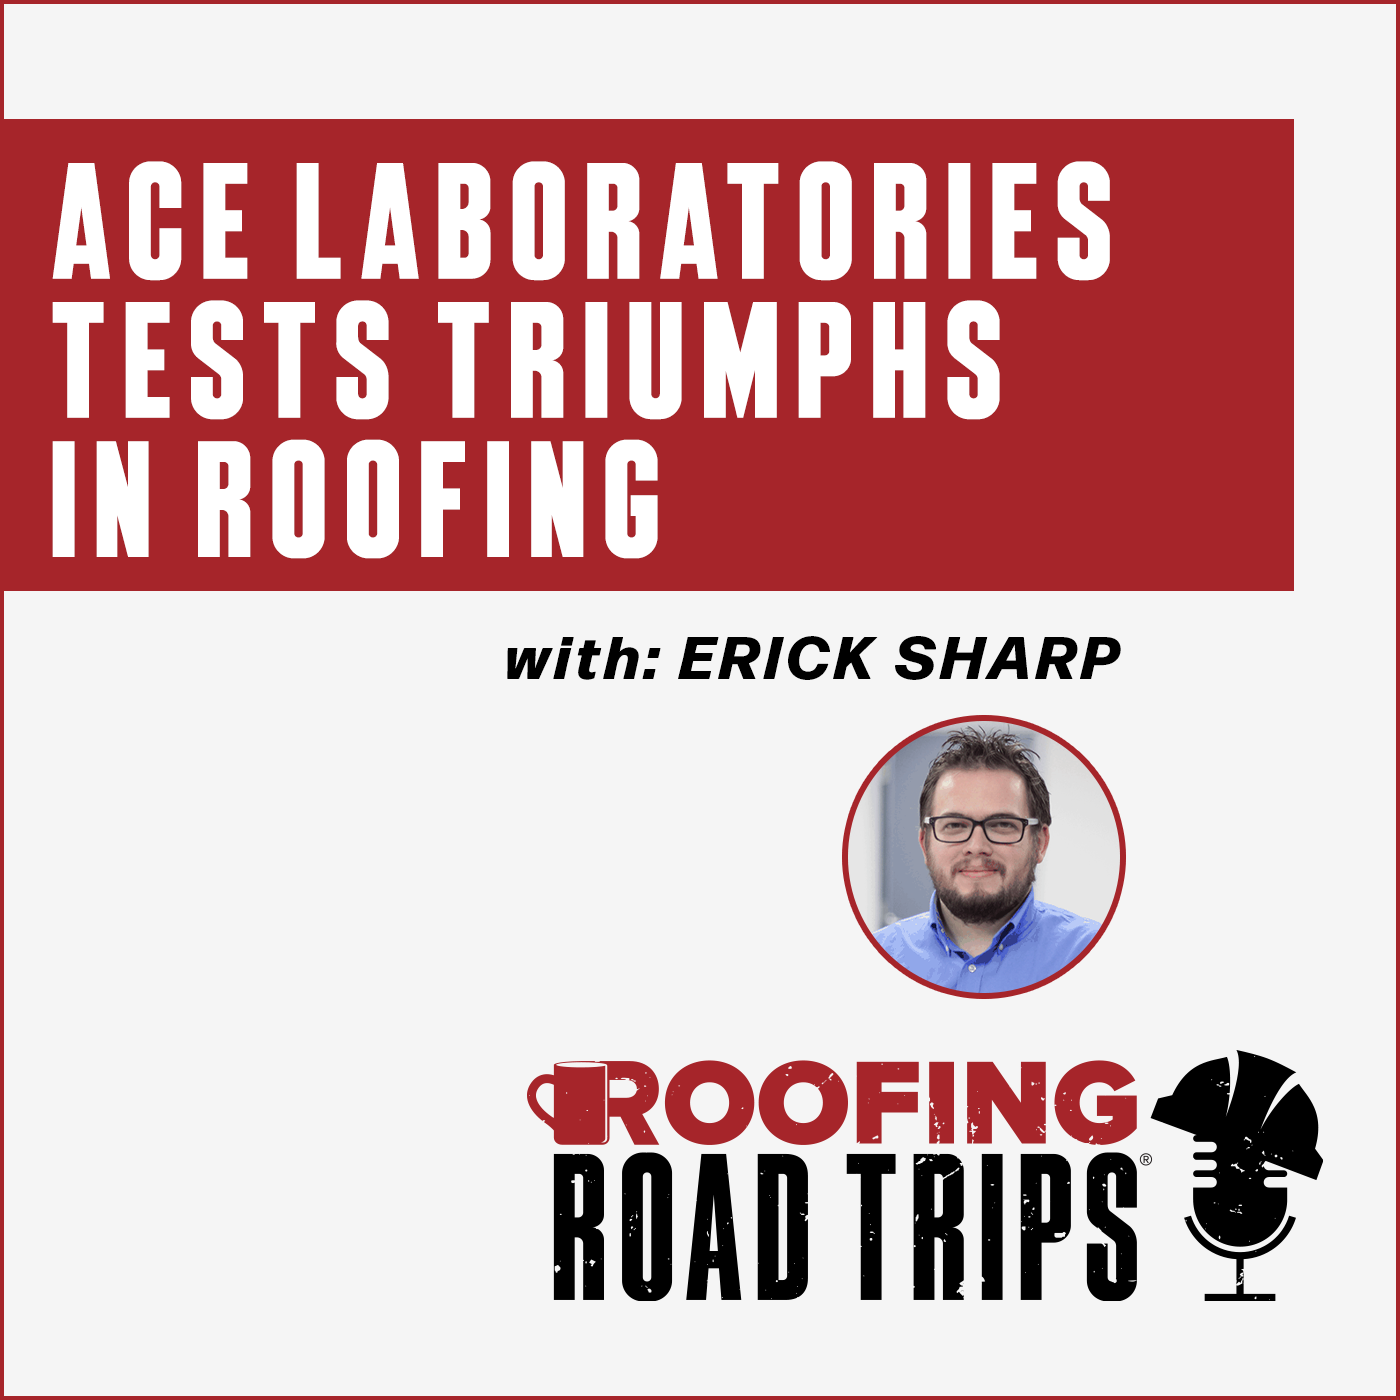 Erick Sharp - ACE Laboratories Tests Triumphs in Roofing